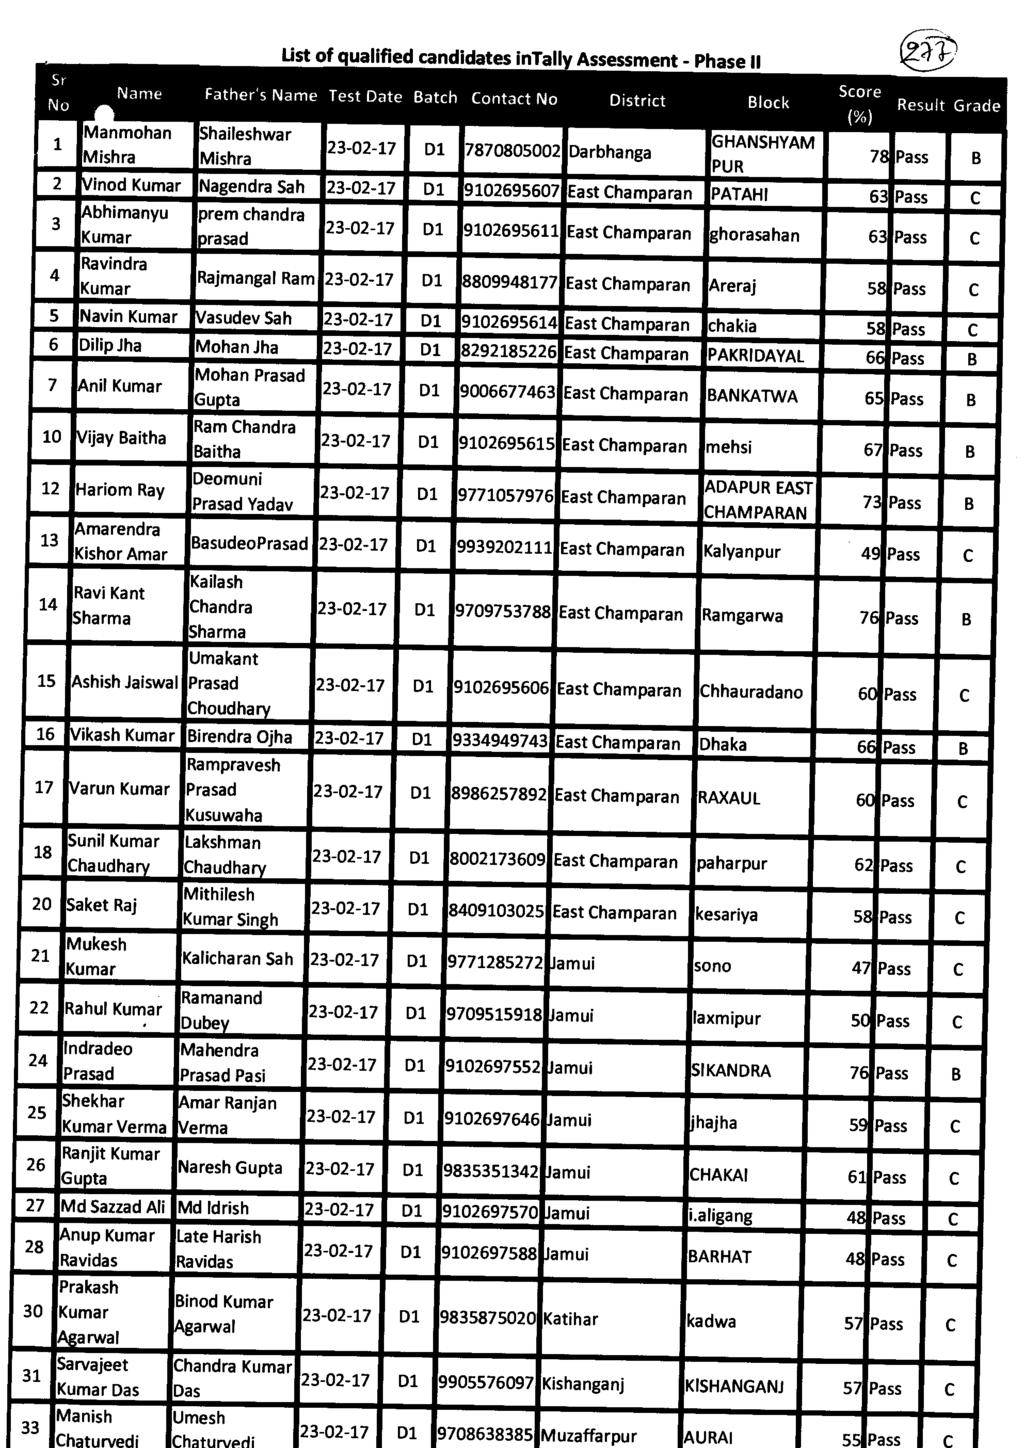 St No 1 Name Manmohan Mishra List of qualified candidates intall Father's Nam e Test Date Shaileshwar Mishra 23-02-17 Batch D1 Contact No 7870805002 Assessment - Phase II District Darbhanga Block